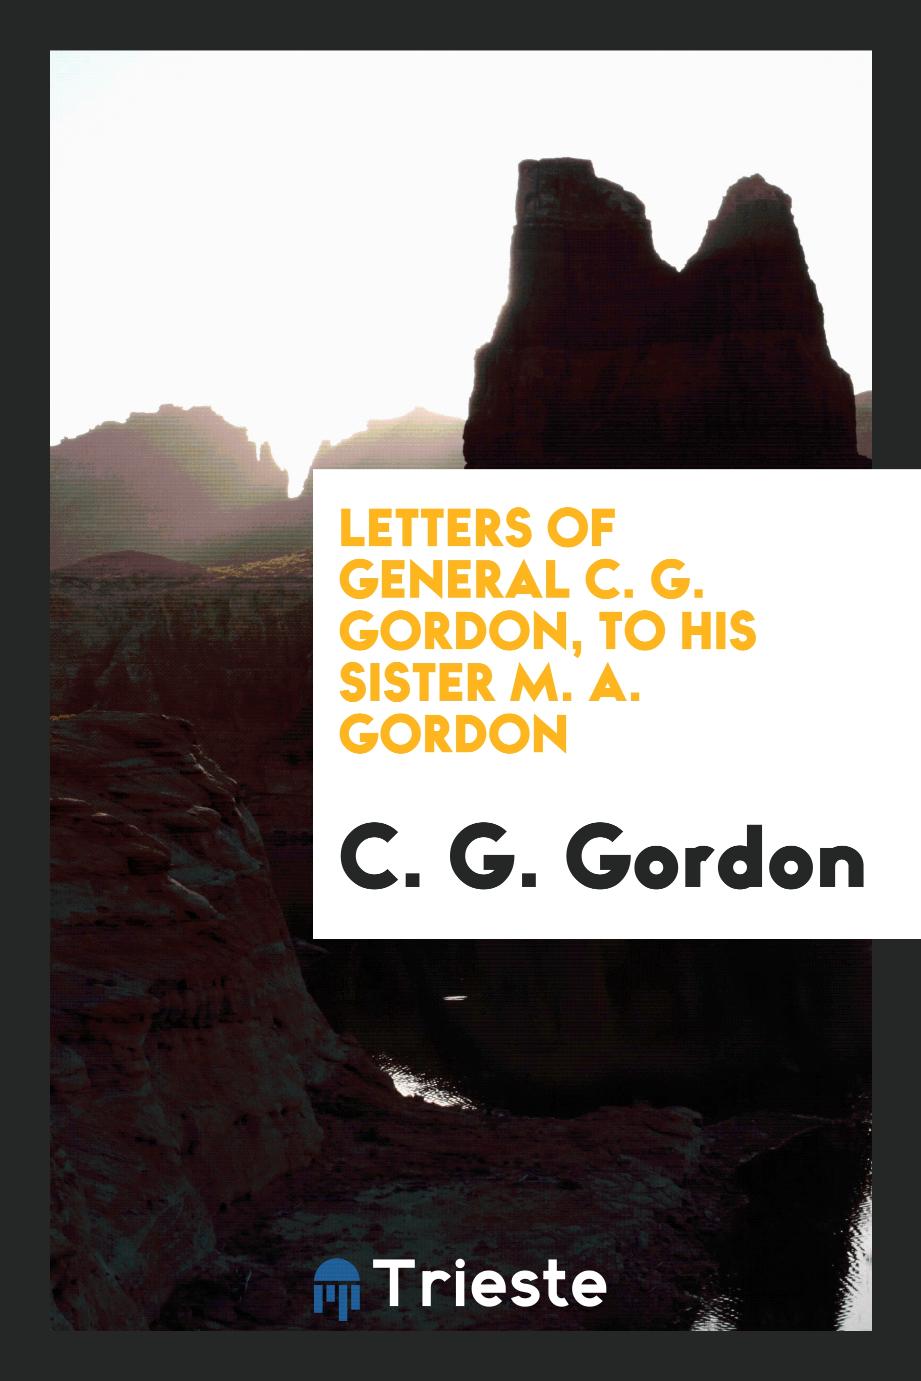 Letters of General C. G. Gordon, to His Sister M. A. Gordon